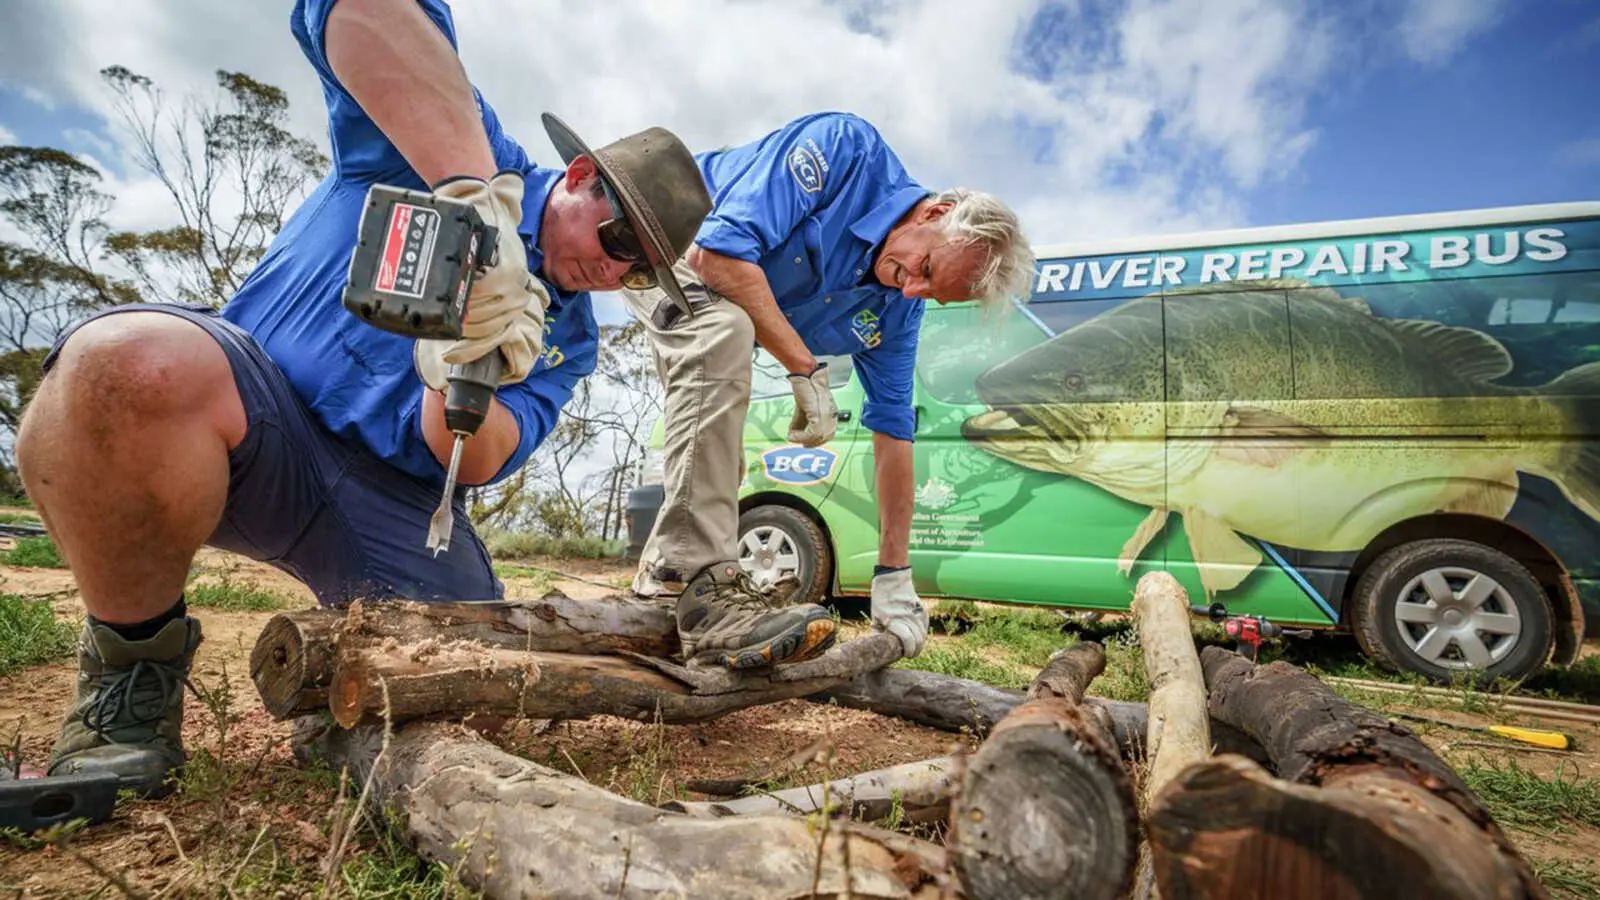 Two men crouched over some logs with a drill and a River Repair Bus in the background